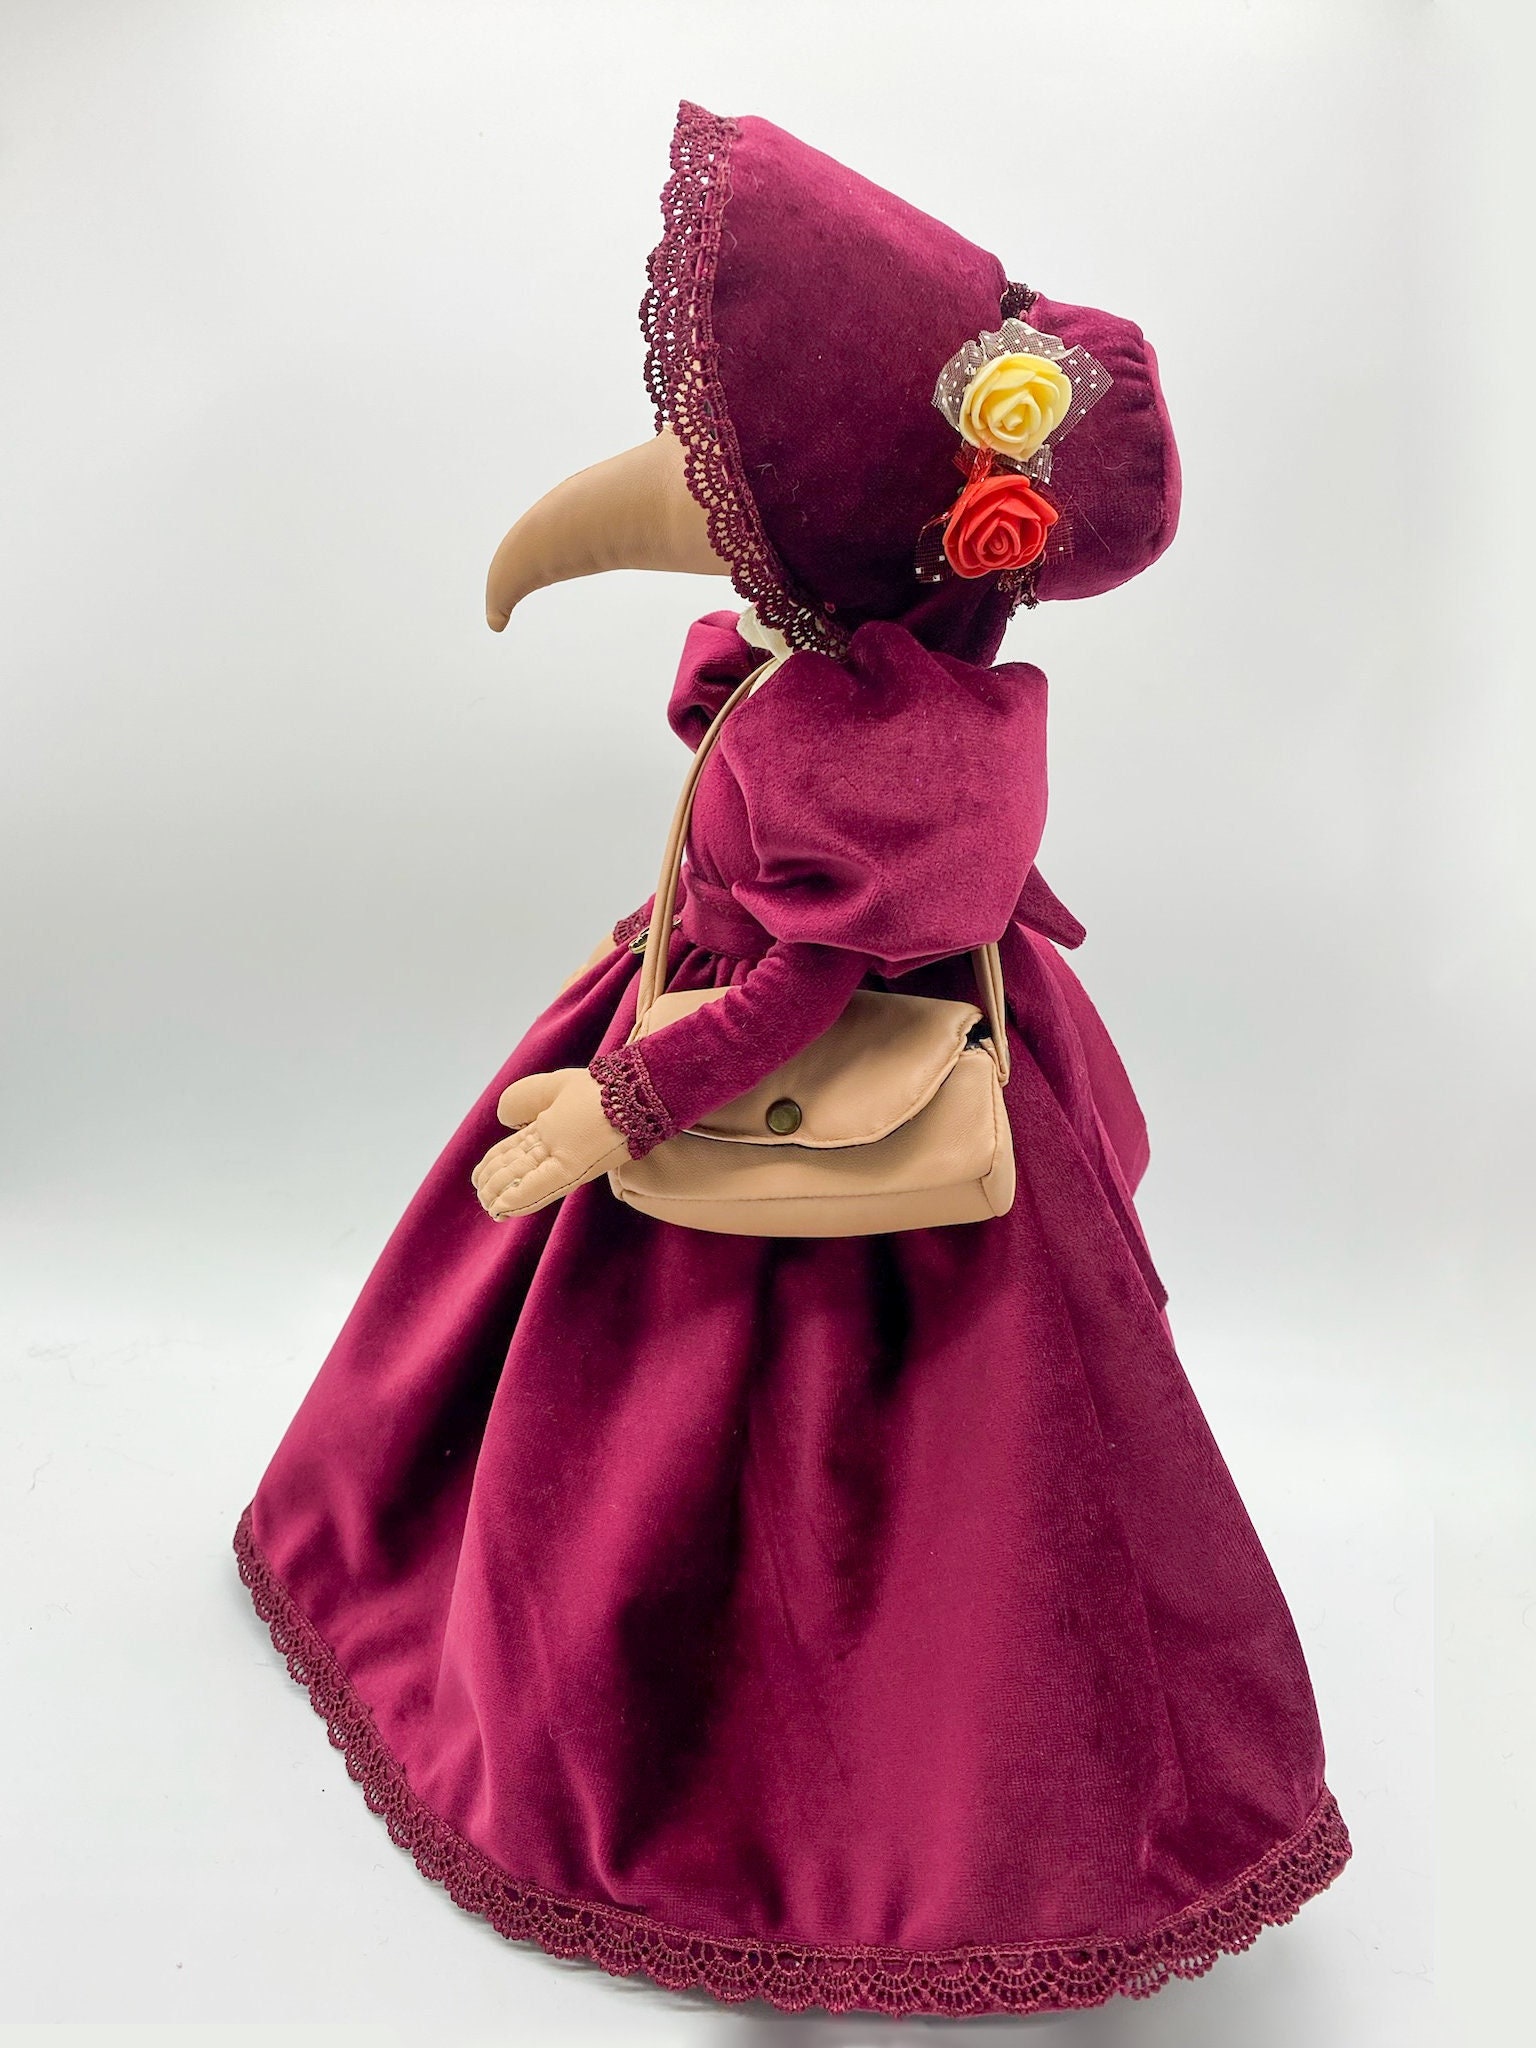 SCP-049 Plague Doctor Minky Plush Toy 